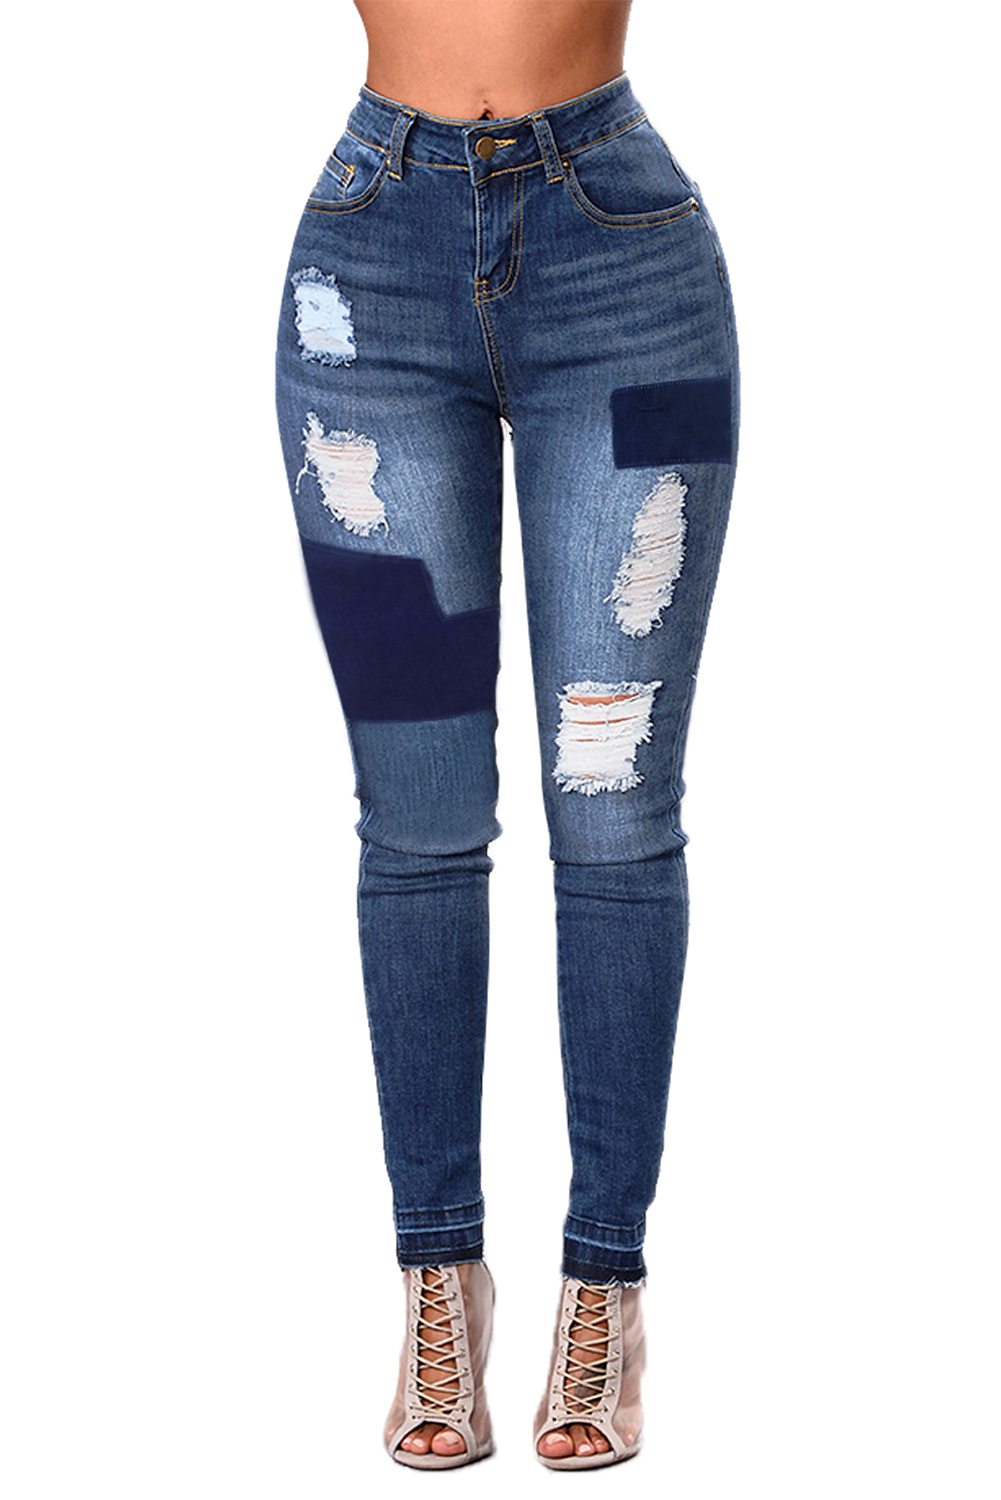 Vivacious Blue Individual Patched Ripped karve jeans